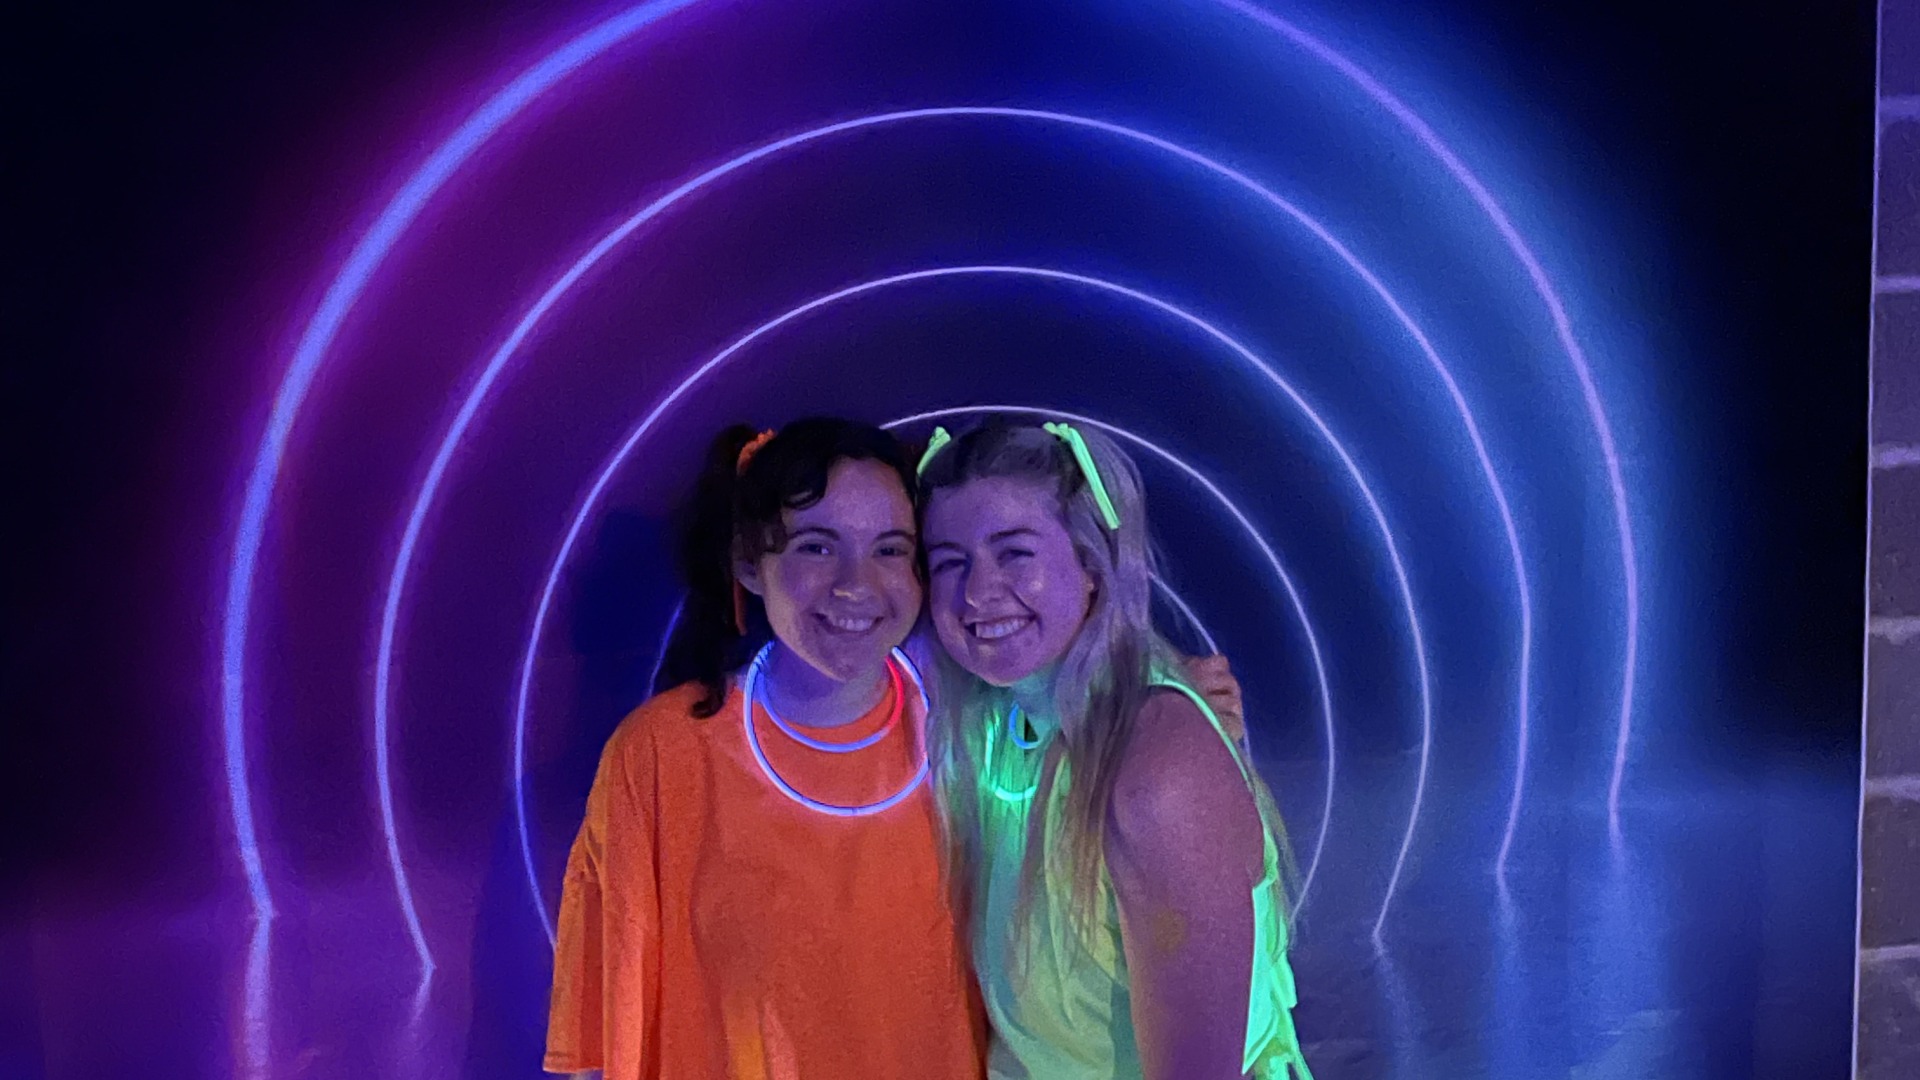 My roommate and I are dressed in neon shirts and hairties with fluorescent rings around our necks and wrists. We pose together in front of the neon half-dome shaped wall in Disco Harris!